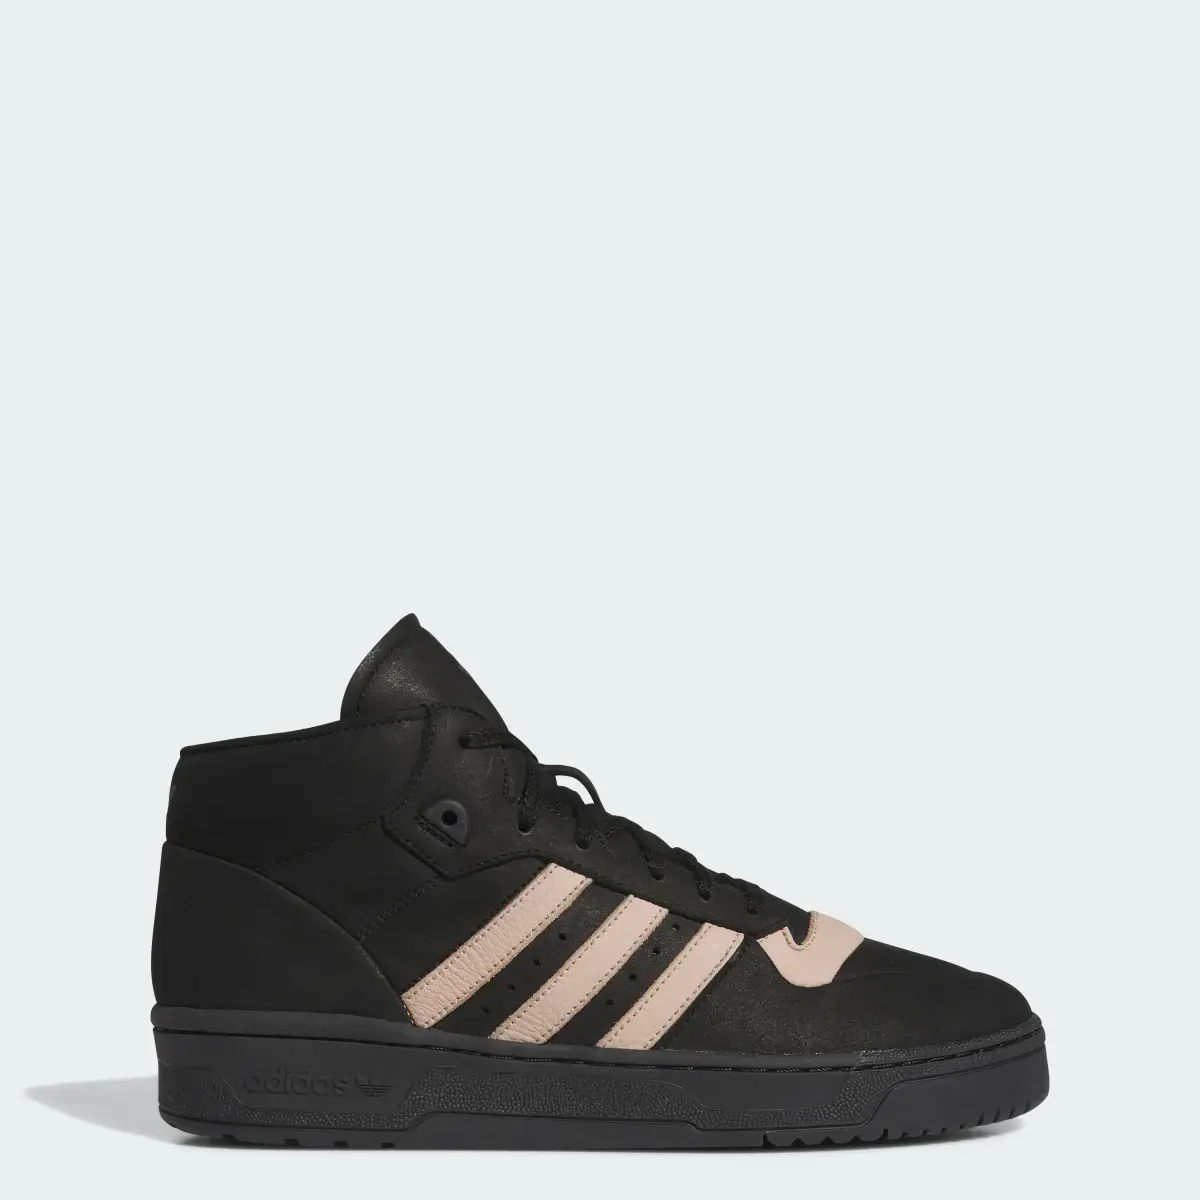 Adidas Rivalry Mid 001 Shoes. 1